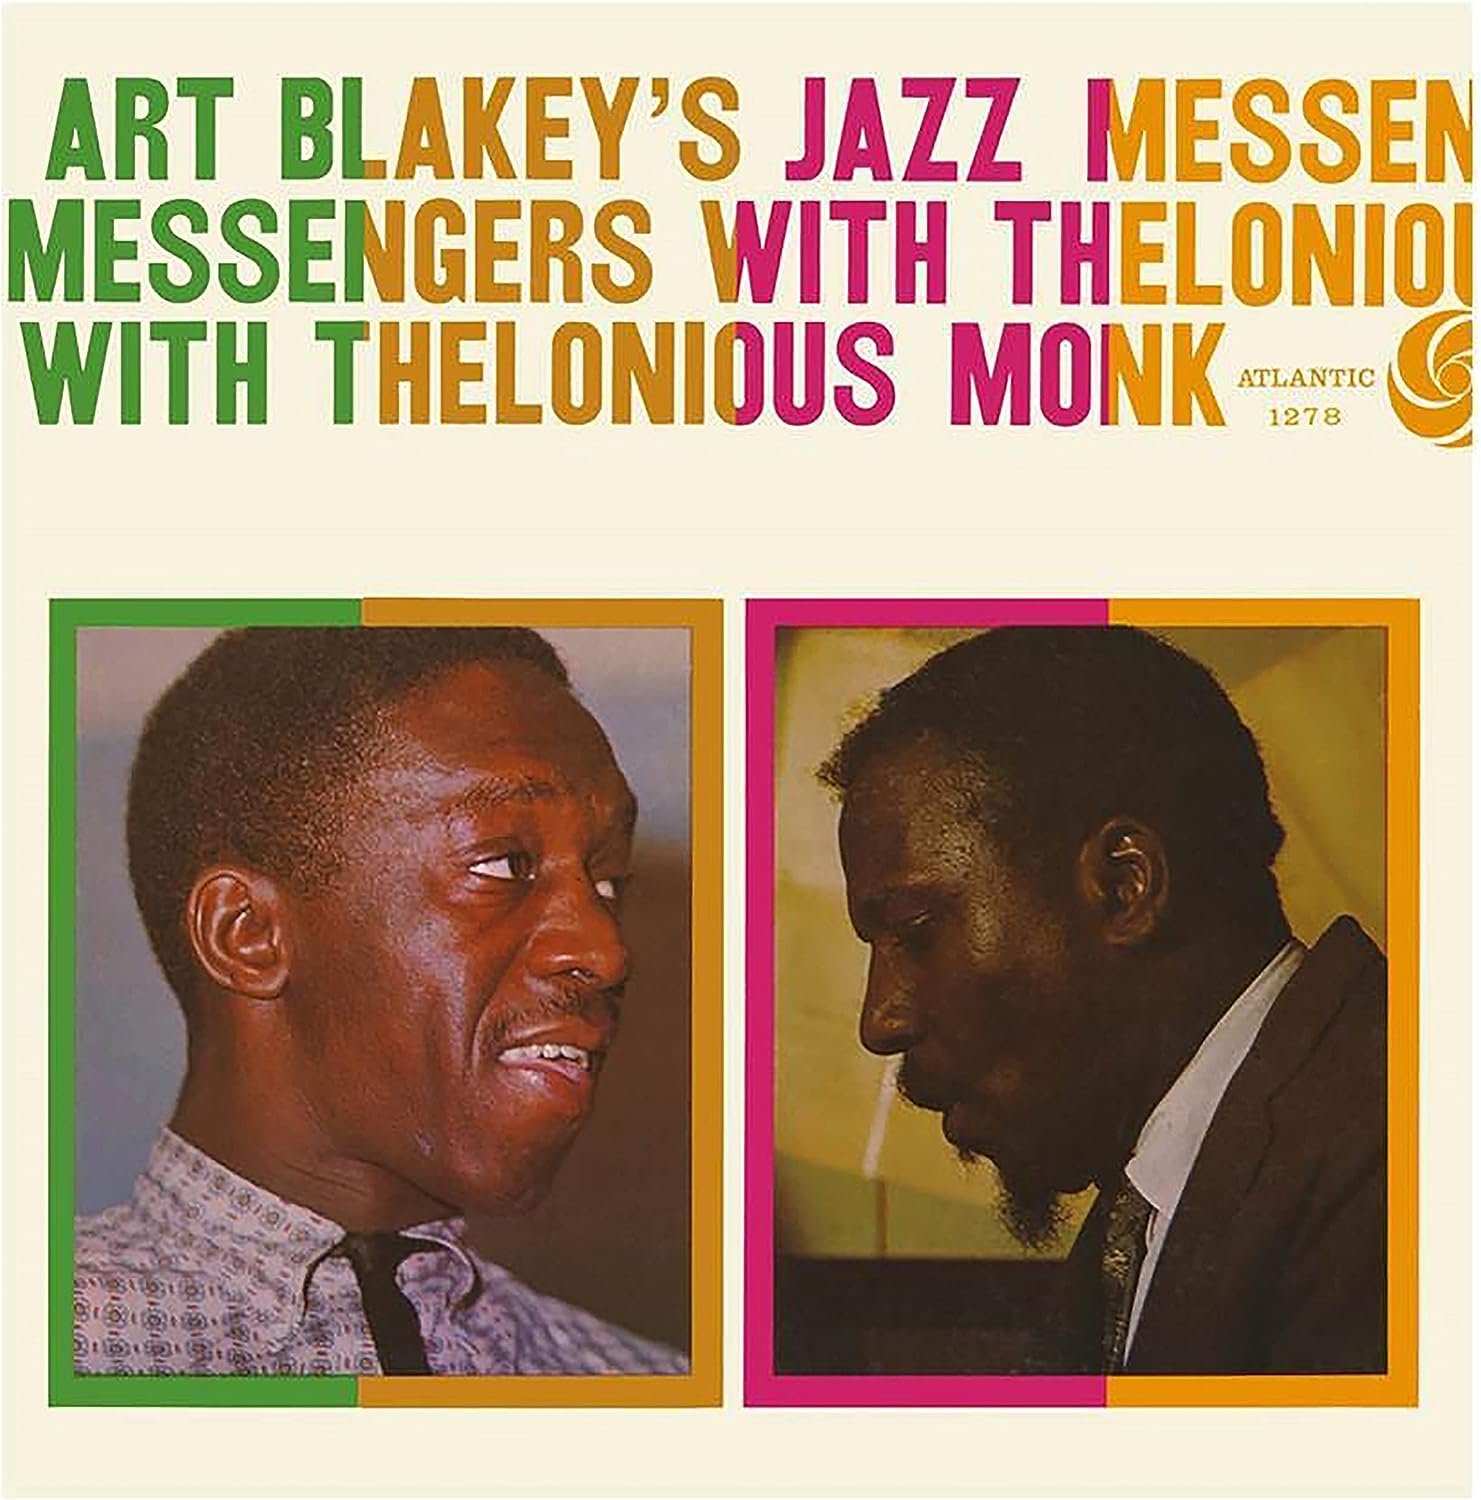 Art Blakey's Jazz Messengers with Thelonious Monk (Deluxe Edition 2LP) - Inner Ocean Records